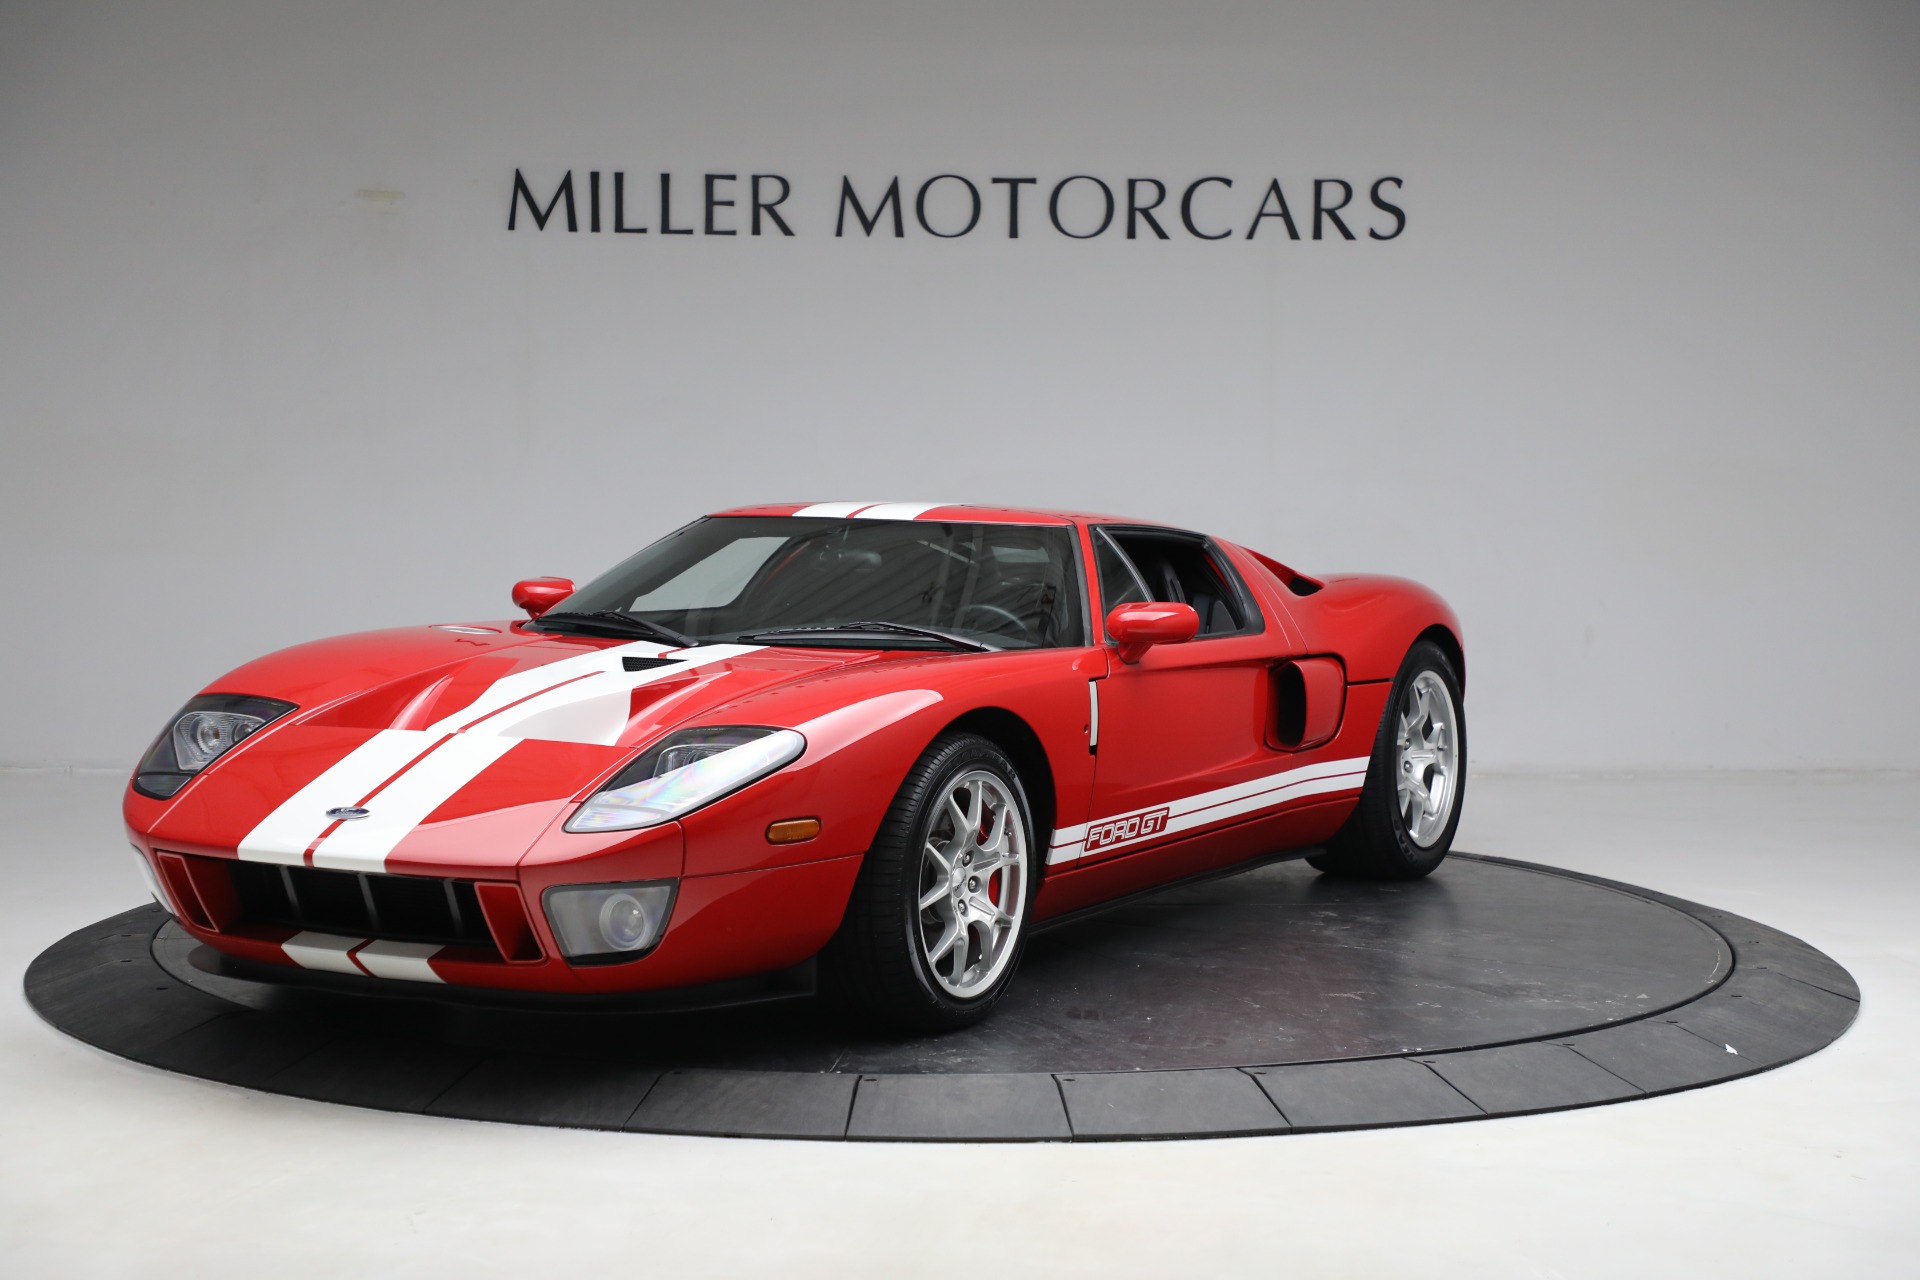 Used 2006 Ford GT for sale $425,900 at Aston Martin of Greenwich in Greenwich CT 06830 1